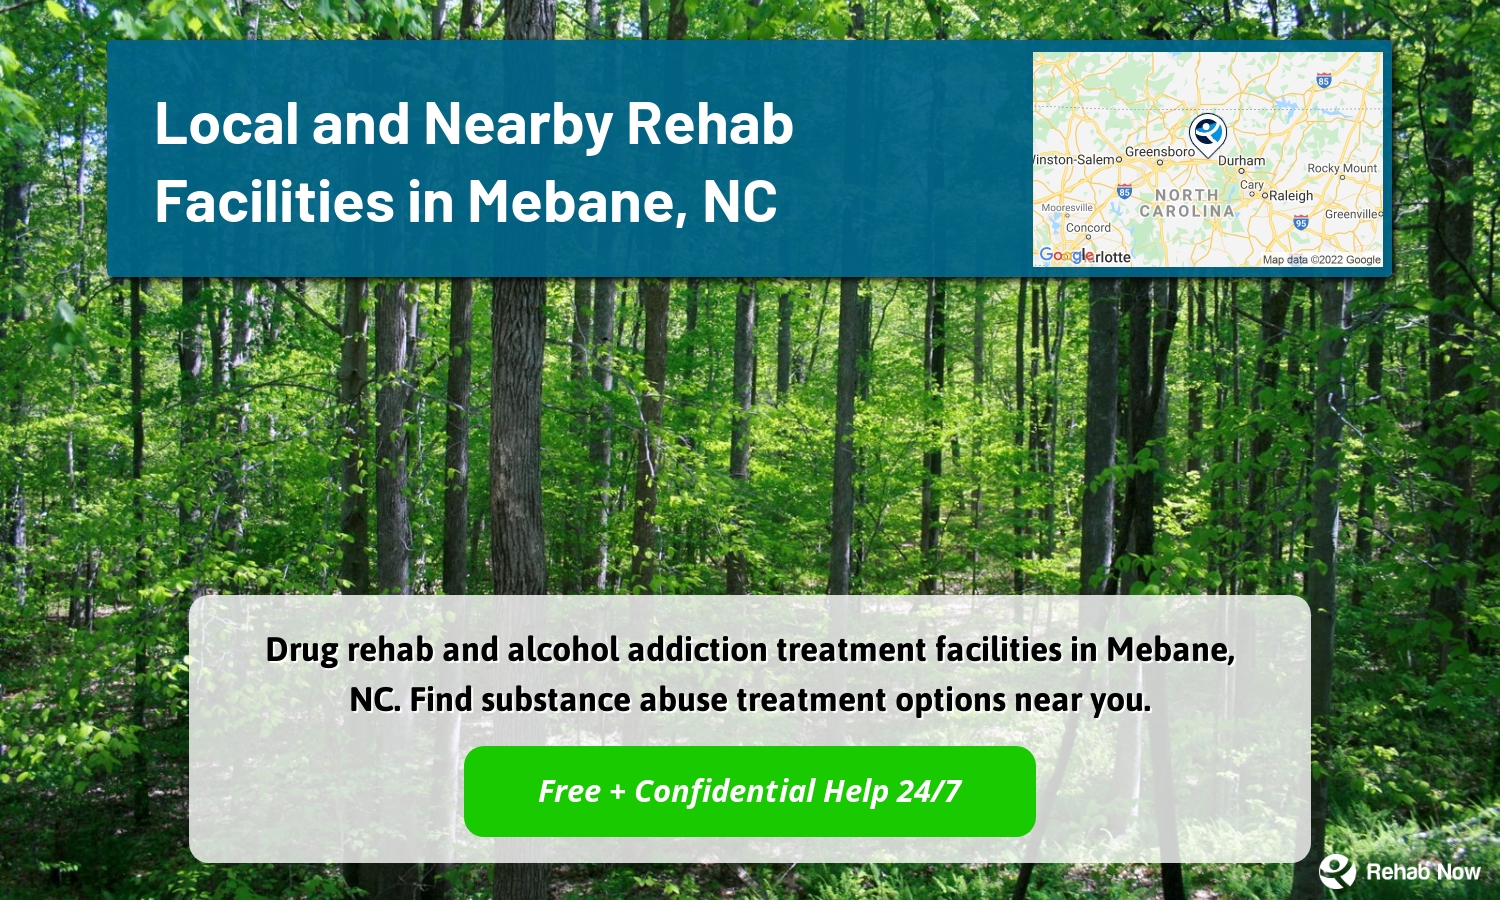 Drug rehab and alcohol addiction treatment facilities in Mebane, NC. Find substance abuse treatment options near you.